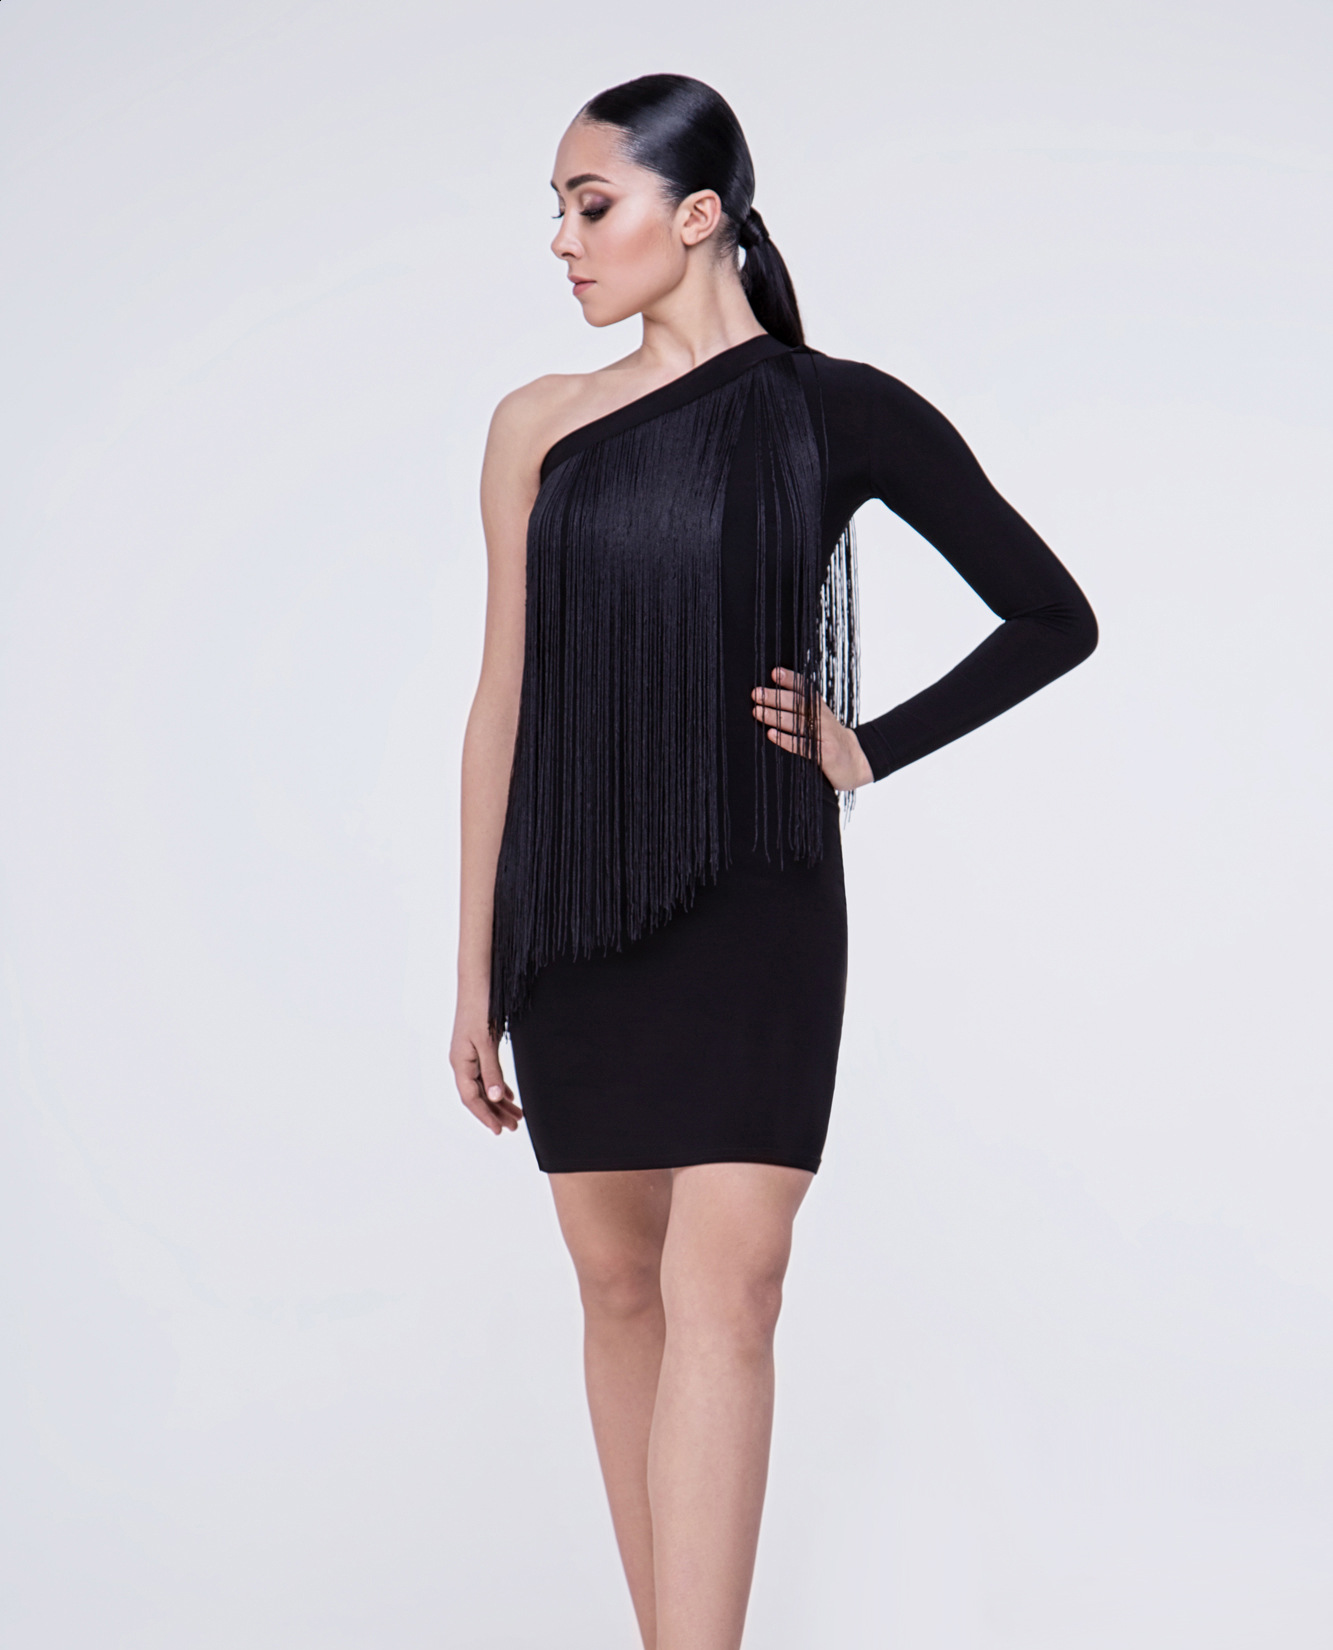 Black Latin or Rhythm Practice Dress with One Sleeve and Long Fringe Starting at Top Seam PRA 366